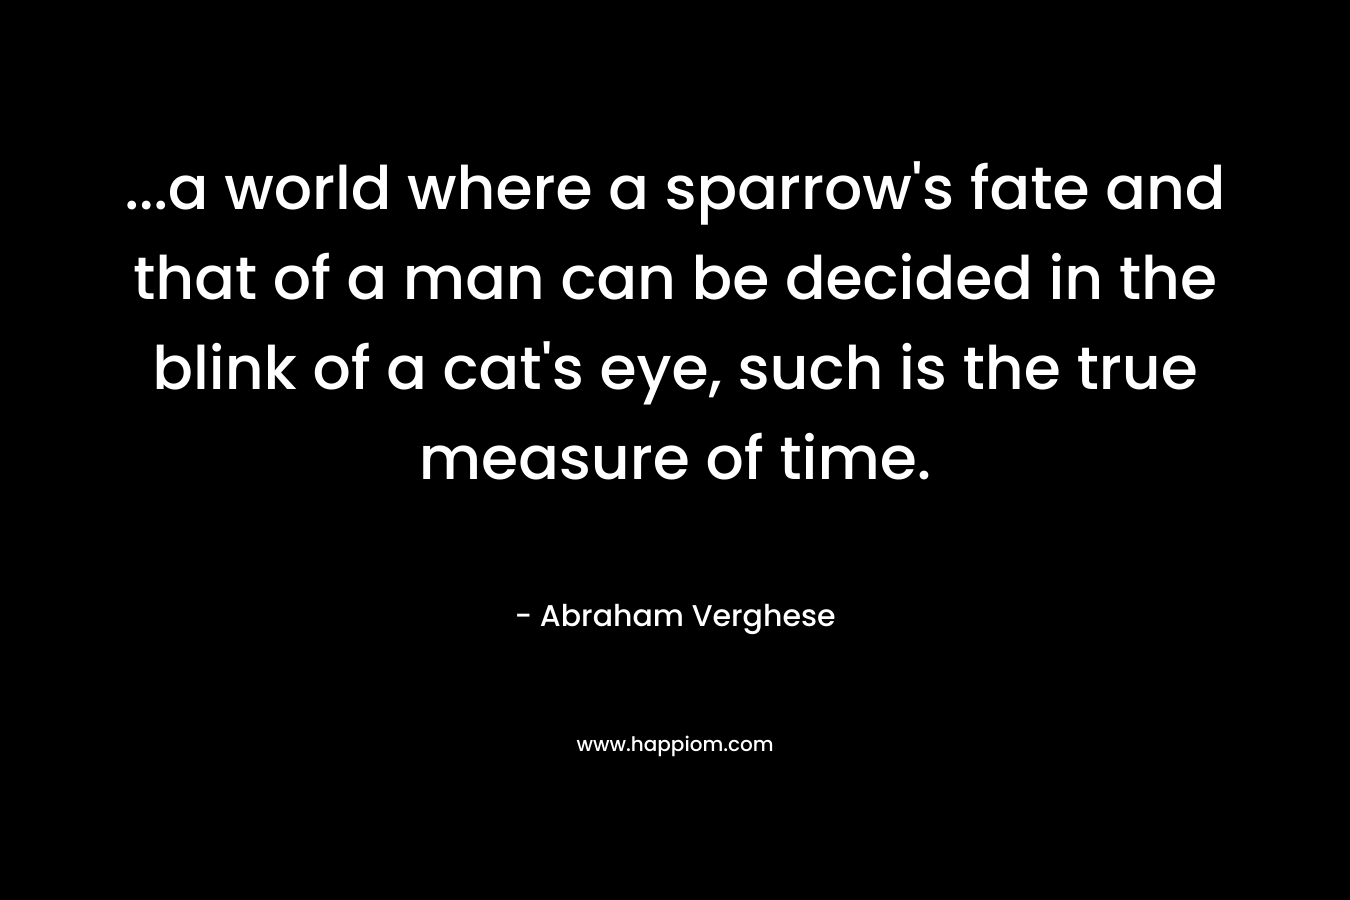 ...a world where a sparrow's fate and that of a man can be decided in the blink of a cat's eye, such is the true measure of time.